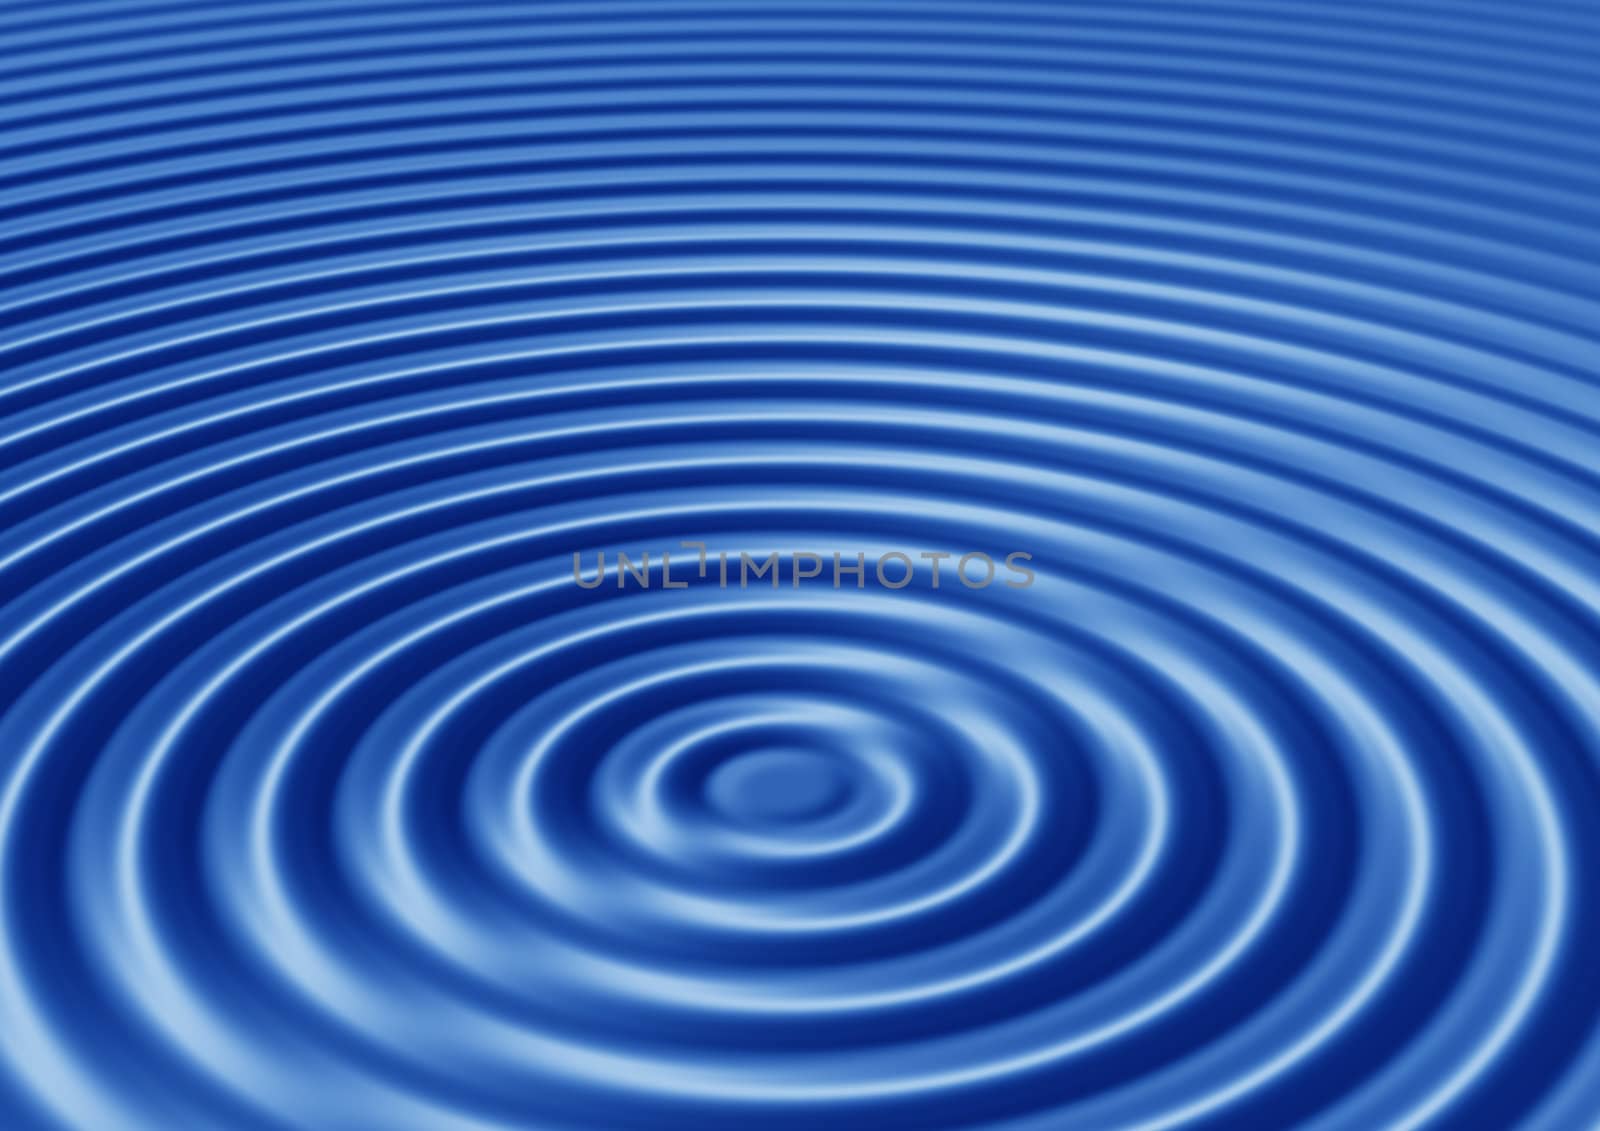 
elegant abstract concentric blue ripples with interference